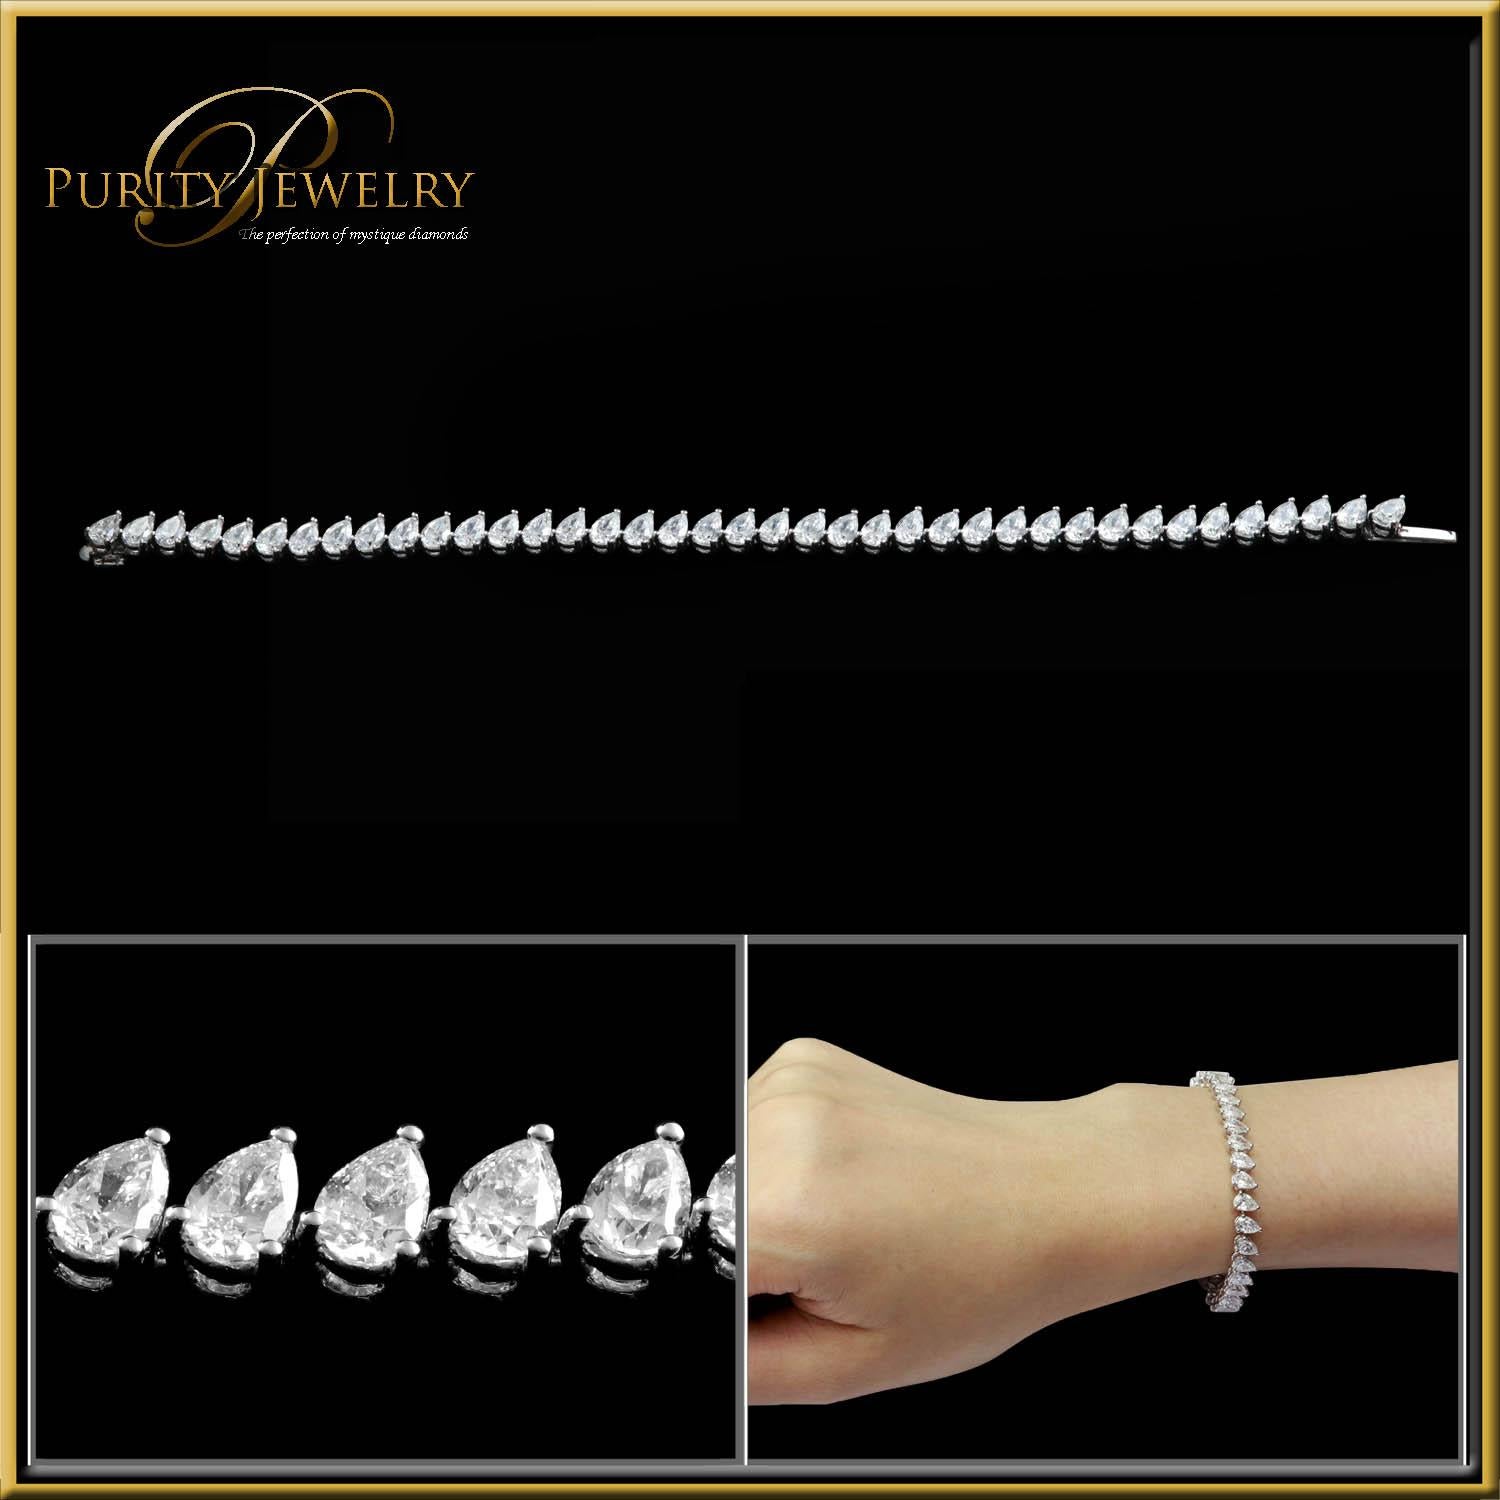 Tennis Bracelet with 1/3ct Oval Cut Diamonds set in 18k Gold.
This is a classic statement bracelet that never goes out of style. 
It is lightweight yet durable, making it a perfect daily wear item.
The stone quality is VS G/H Color. 
The bracelets